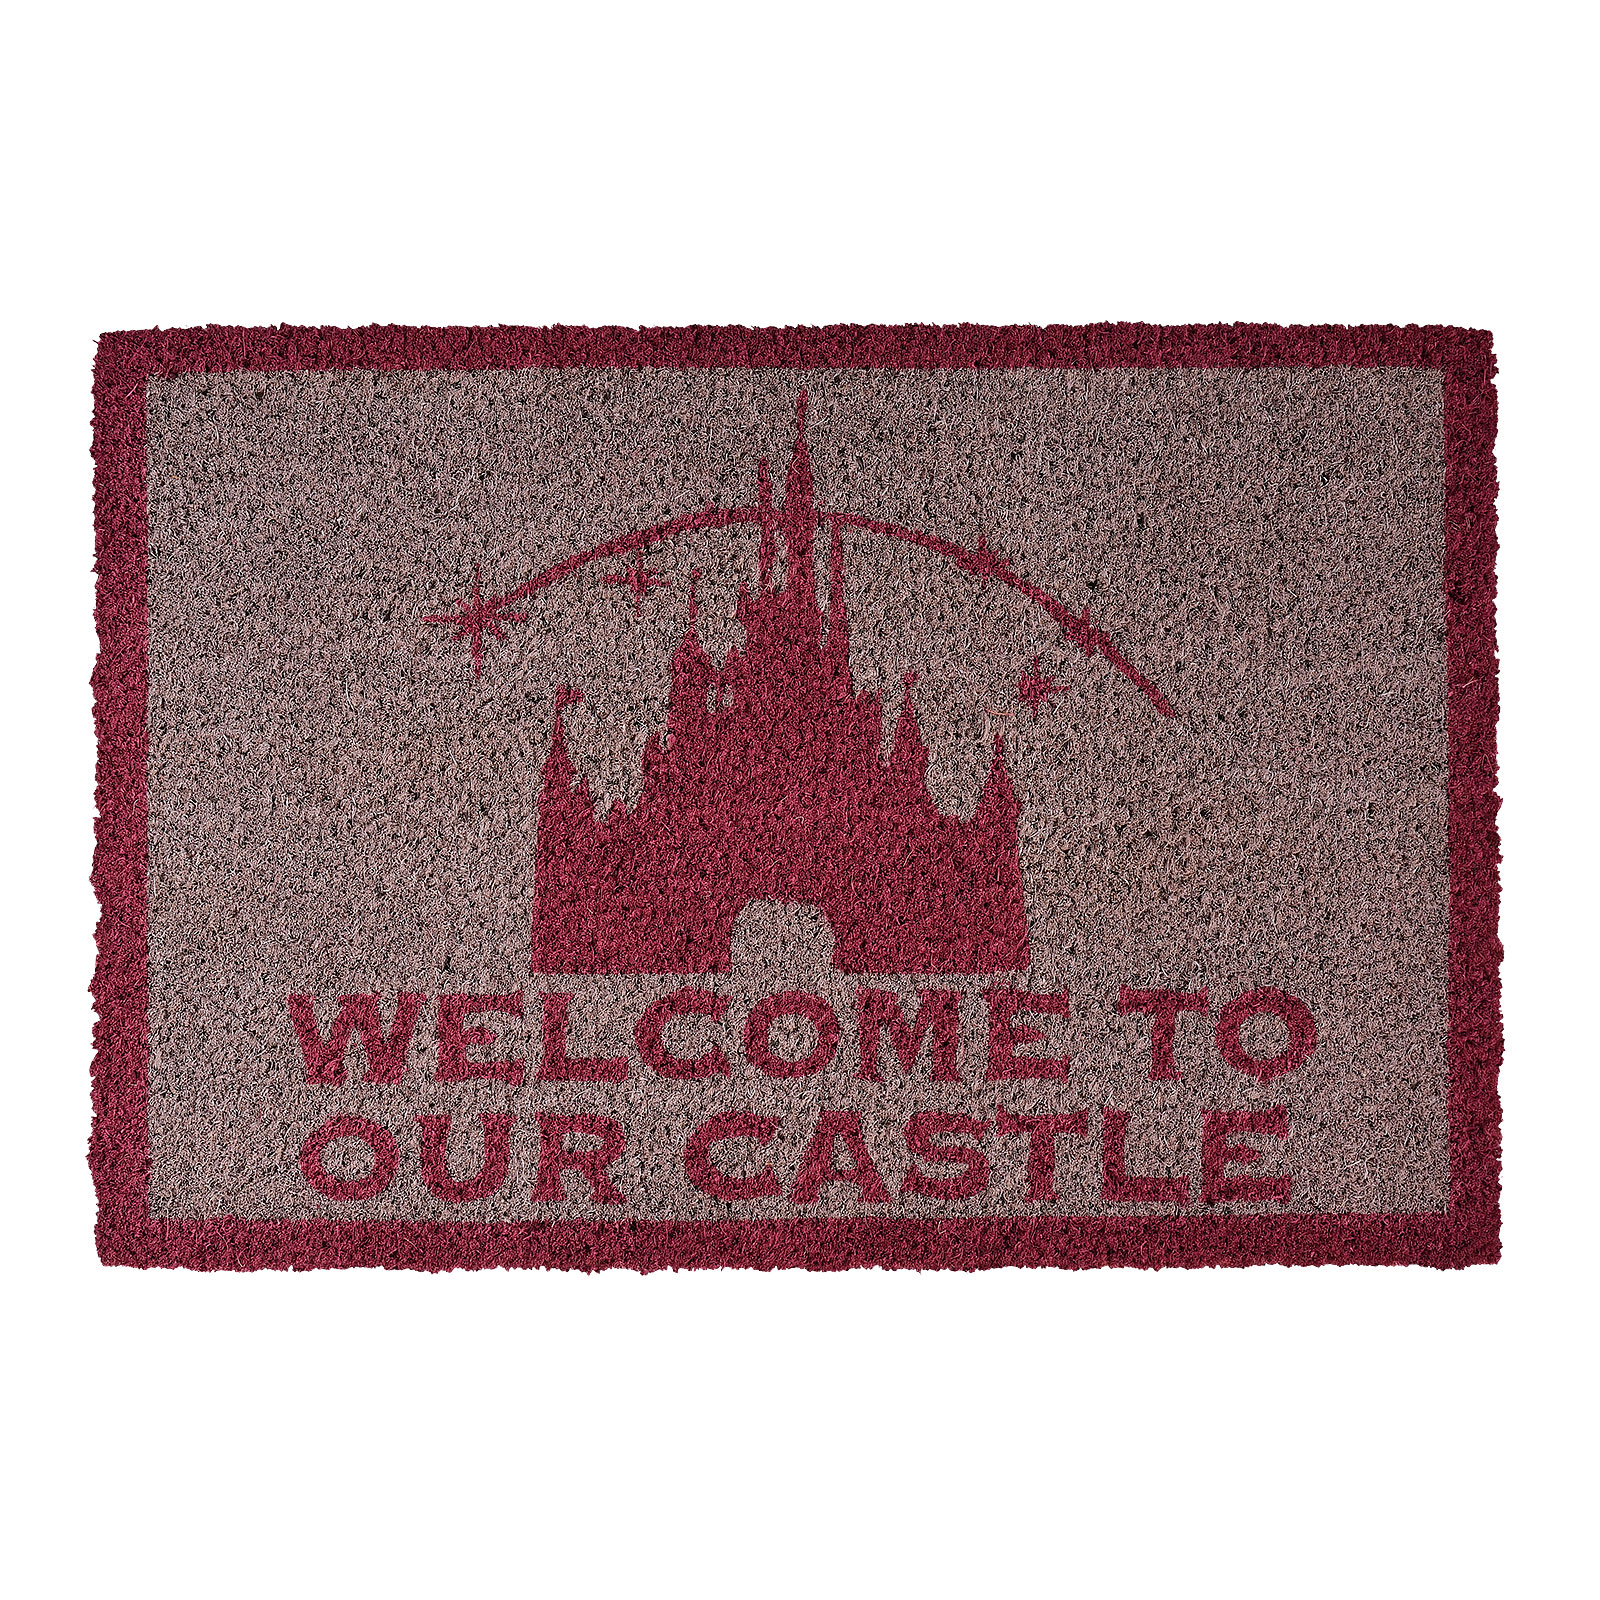 Disney - Welcome to Our Castle Fußmatte